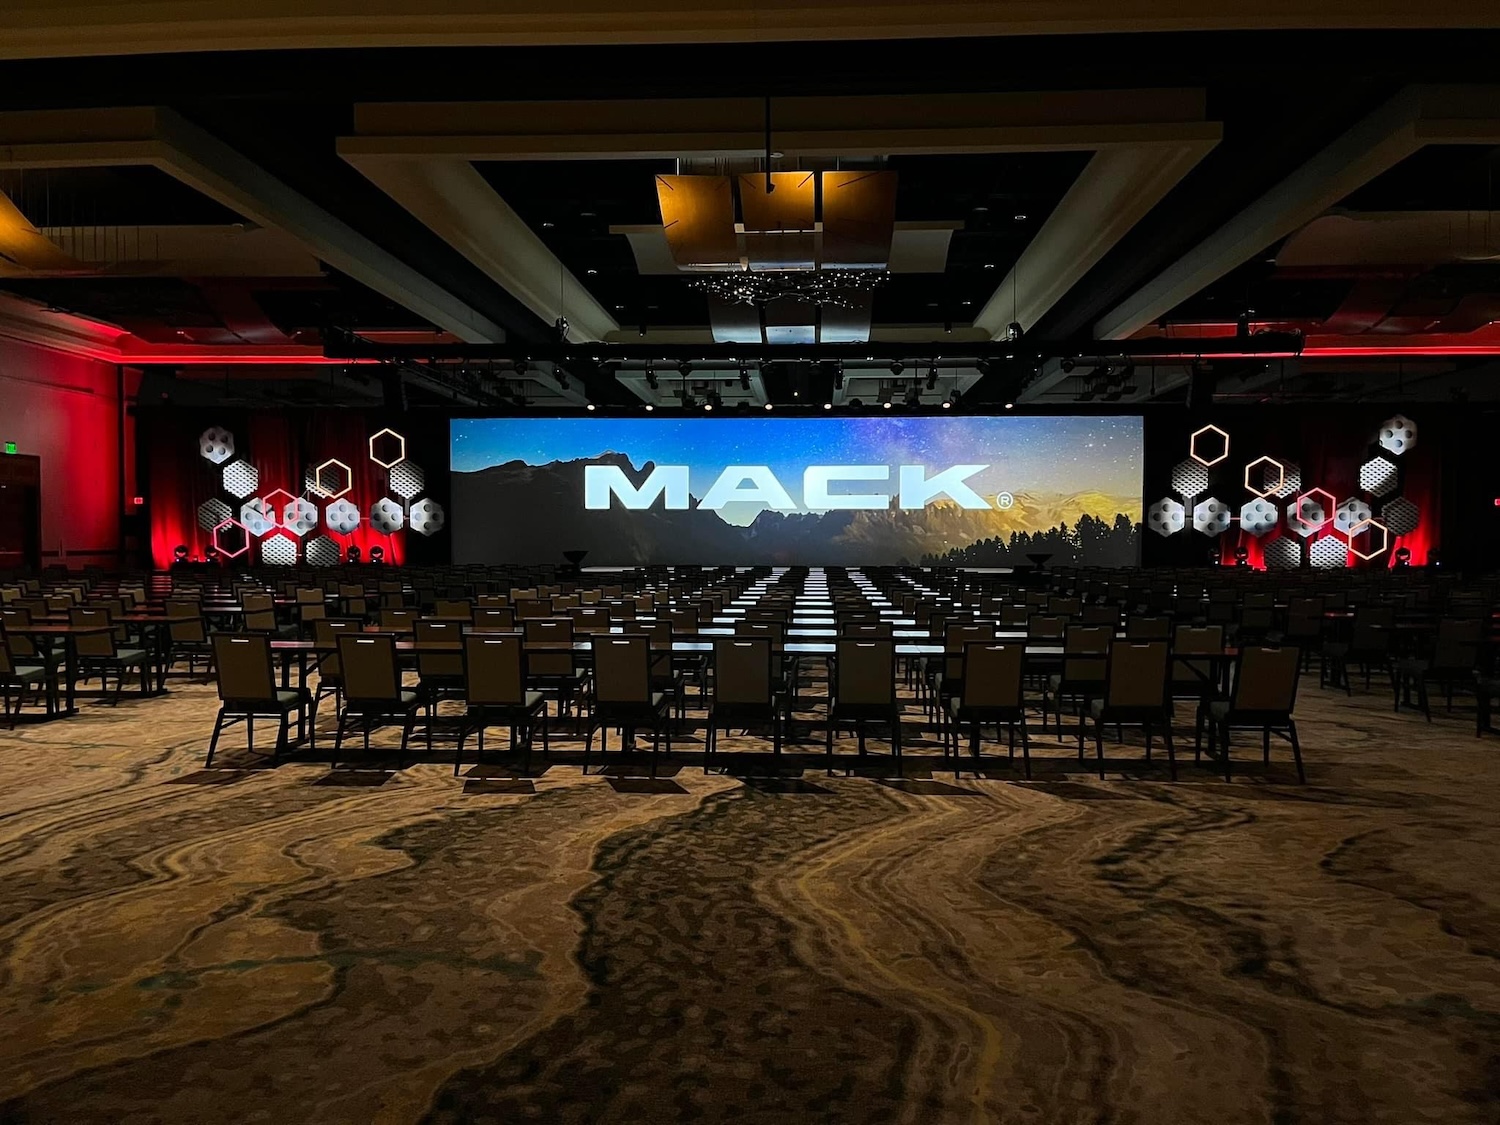 An event space with rows of chairs and a large screen displaying the 'MACK' logo, flanked by red lighting and geometric decor on the walls.